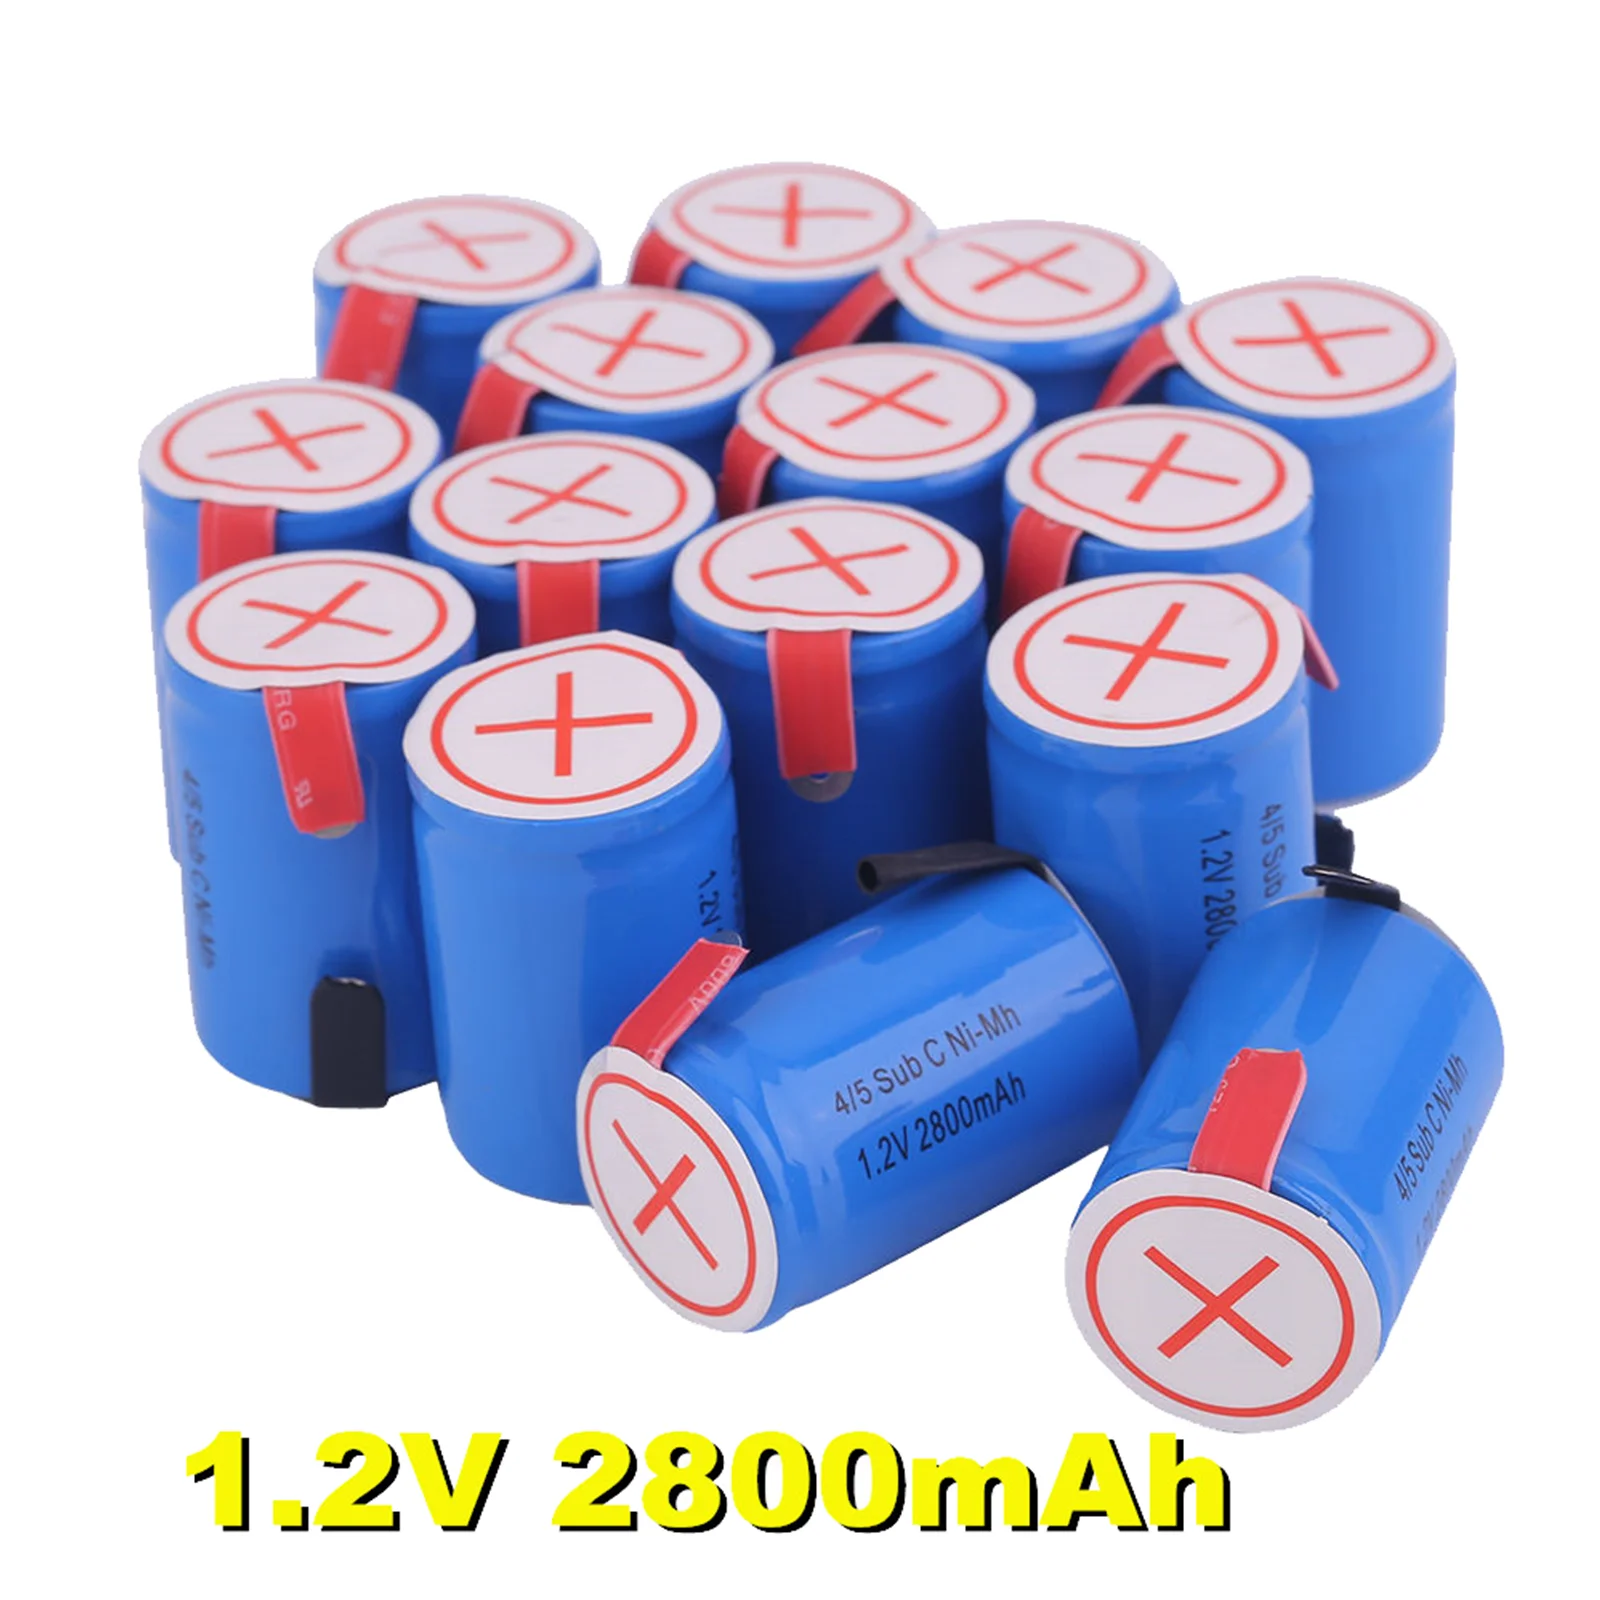 New 4/5SC Sub C Li-ion Li-Po Lithium Battery High-discharge 1.2V 2800mAh Rechargeable Ni-MH Batteries with Welding Tabs